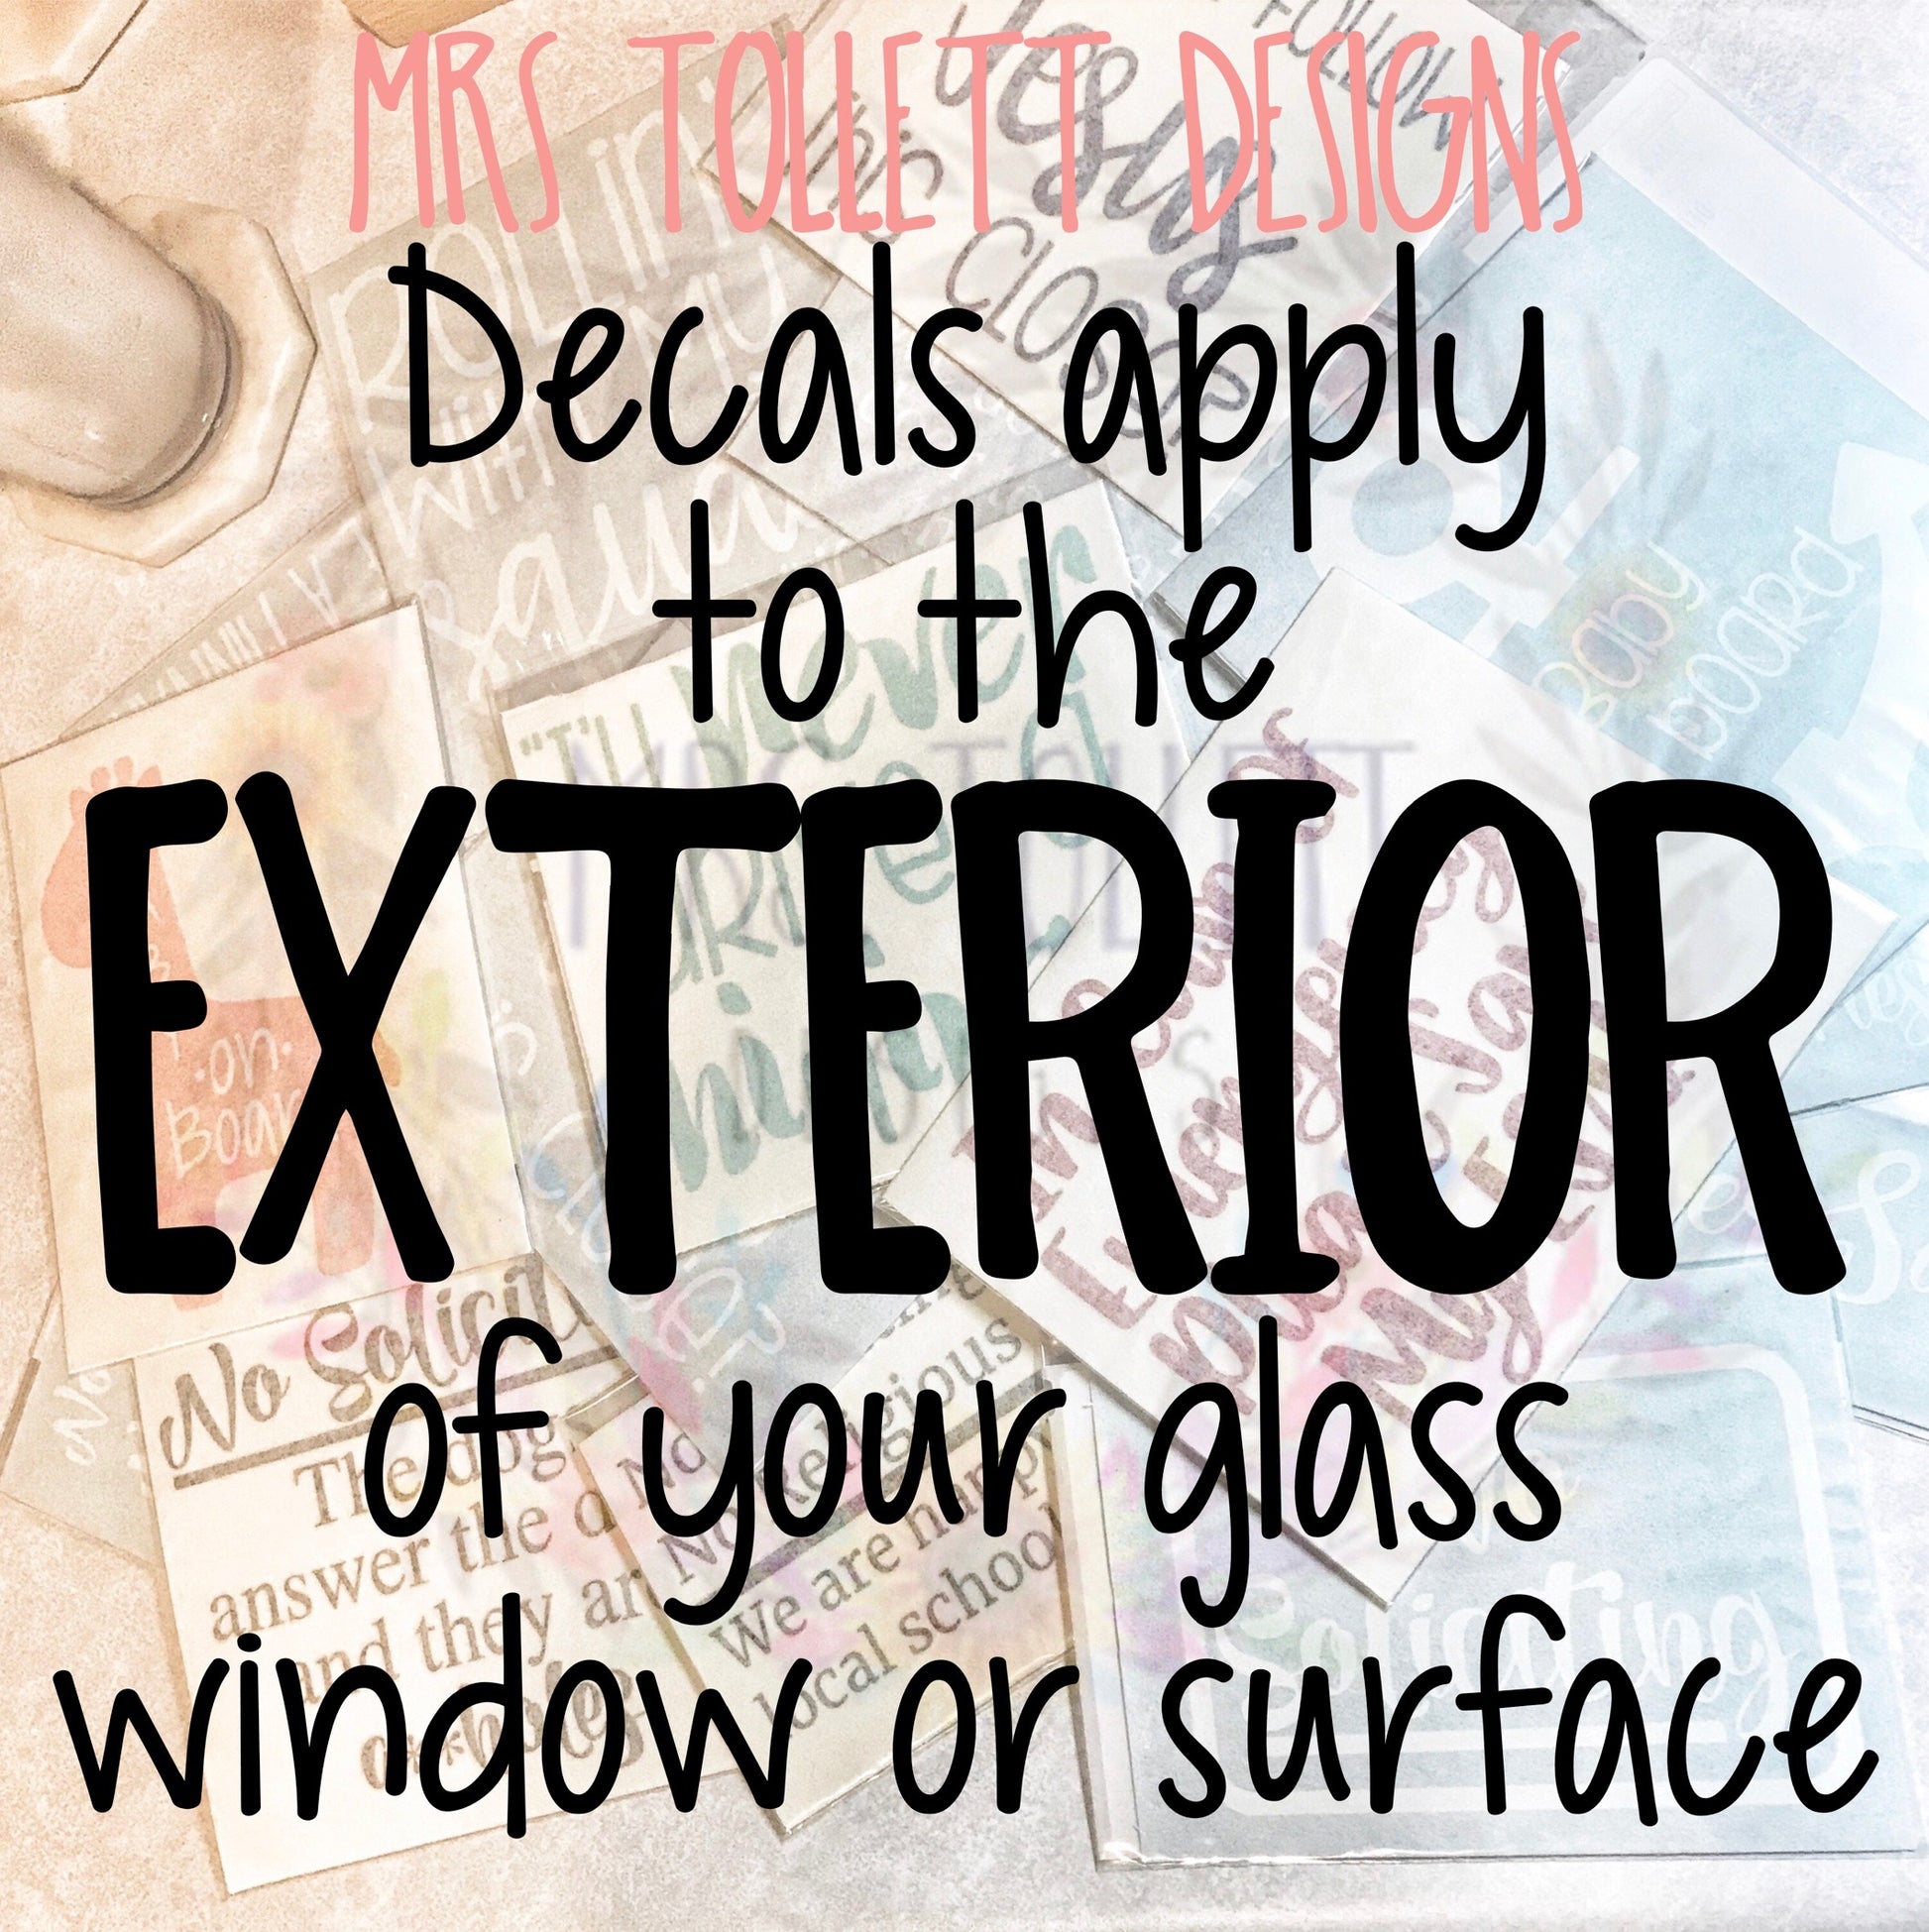 Mrs Tollett Designs Vinyl Car Decals apply to the exterior of your glass surface or window.